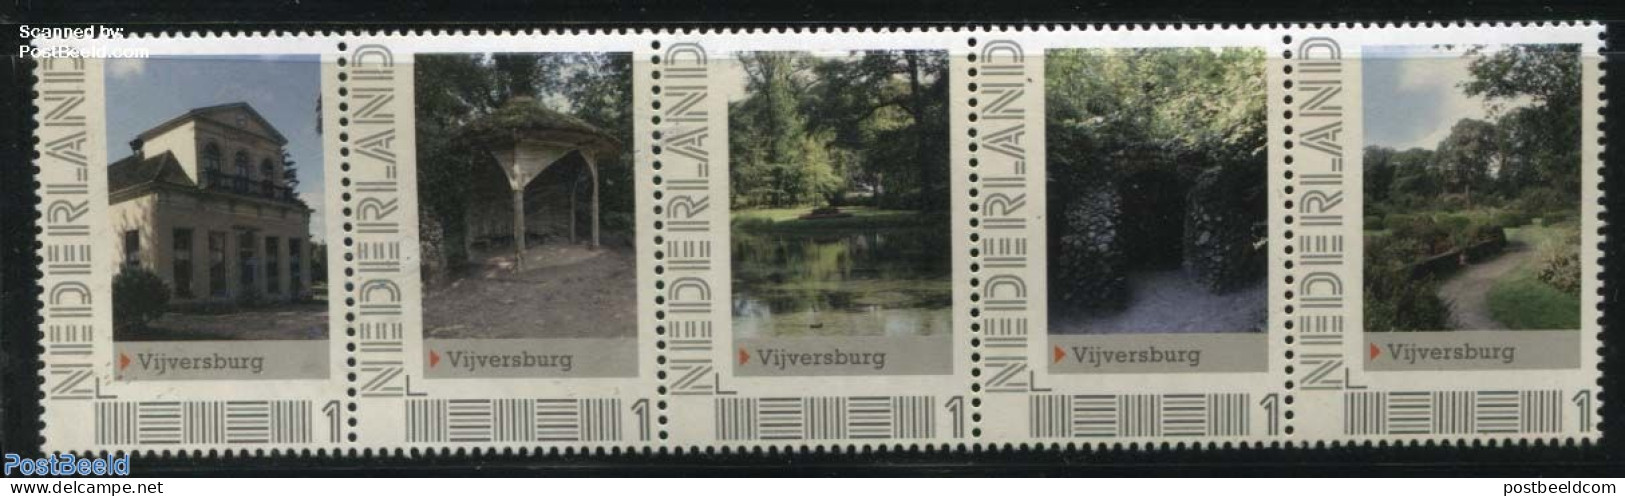 Netherlands - Personal Stamps TNT/PNL 2012 Vijversburg 5V [::::], Mint NH, Nature - Trees & Forests - Castles & Fortif.. - Rotary, Lions Club